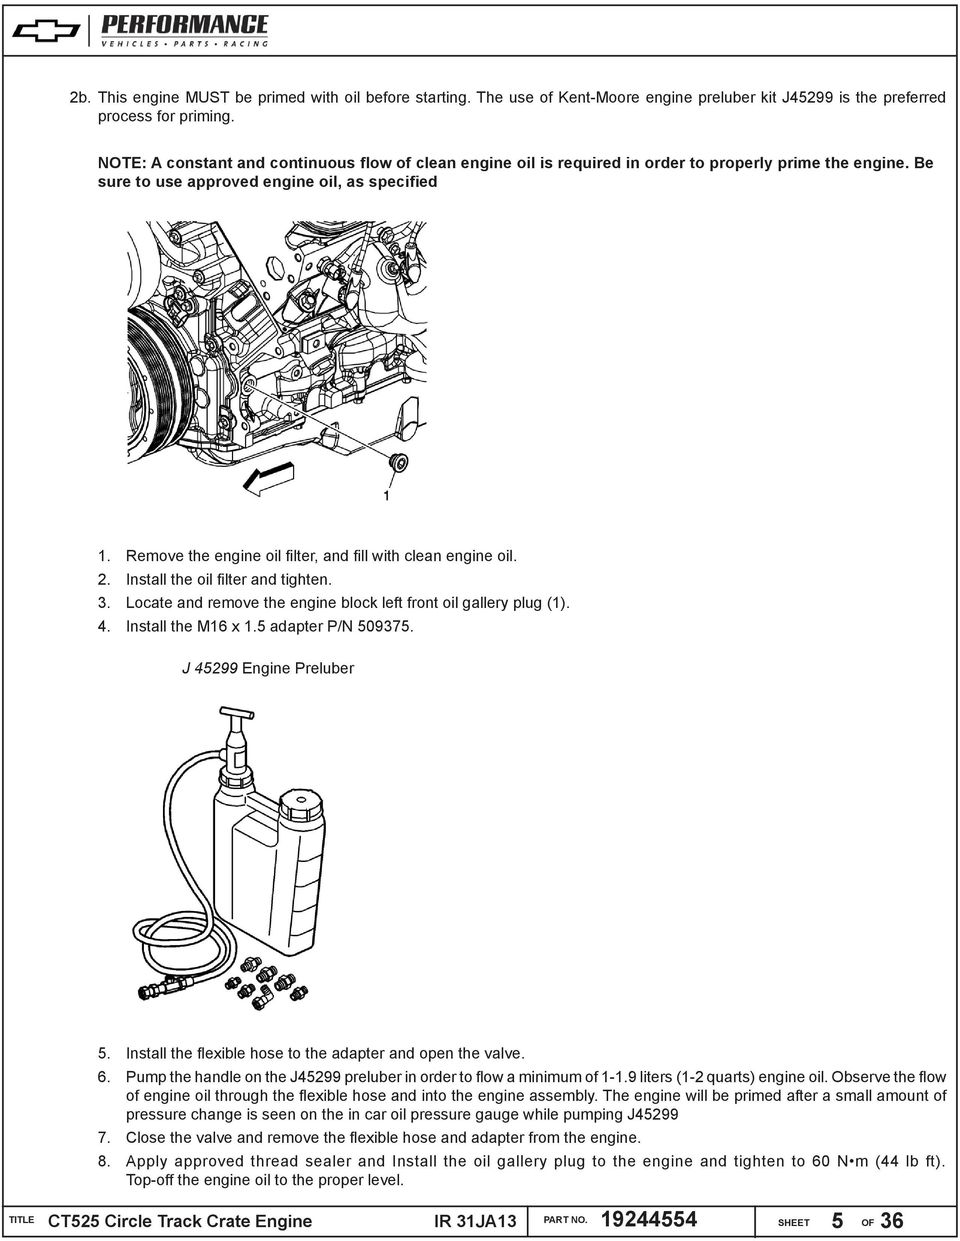 Remove the engine oil filter, and fill with clean engine oil. 2. Install the oil filter and tighten. 3. Locate and remove the engine block left front oil gallery plug (1). 4. Install the M16 x 1.